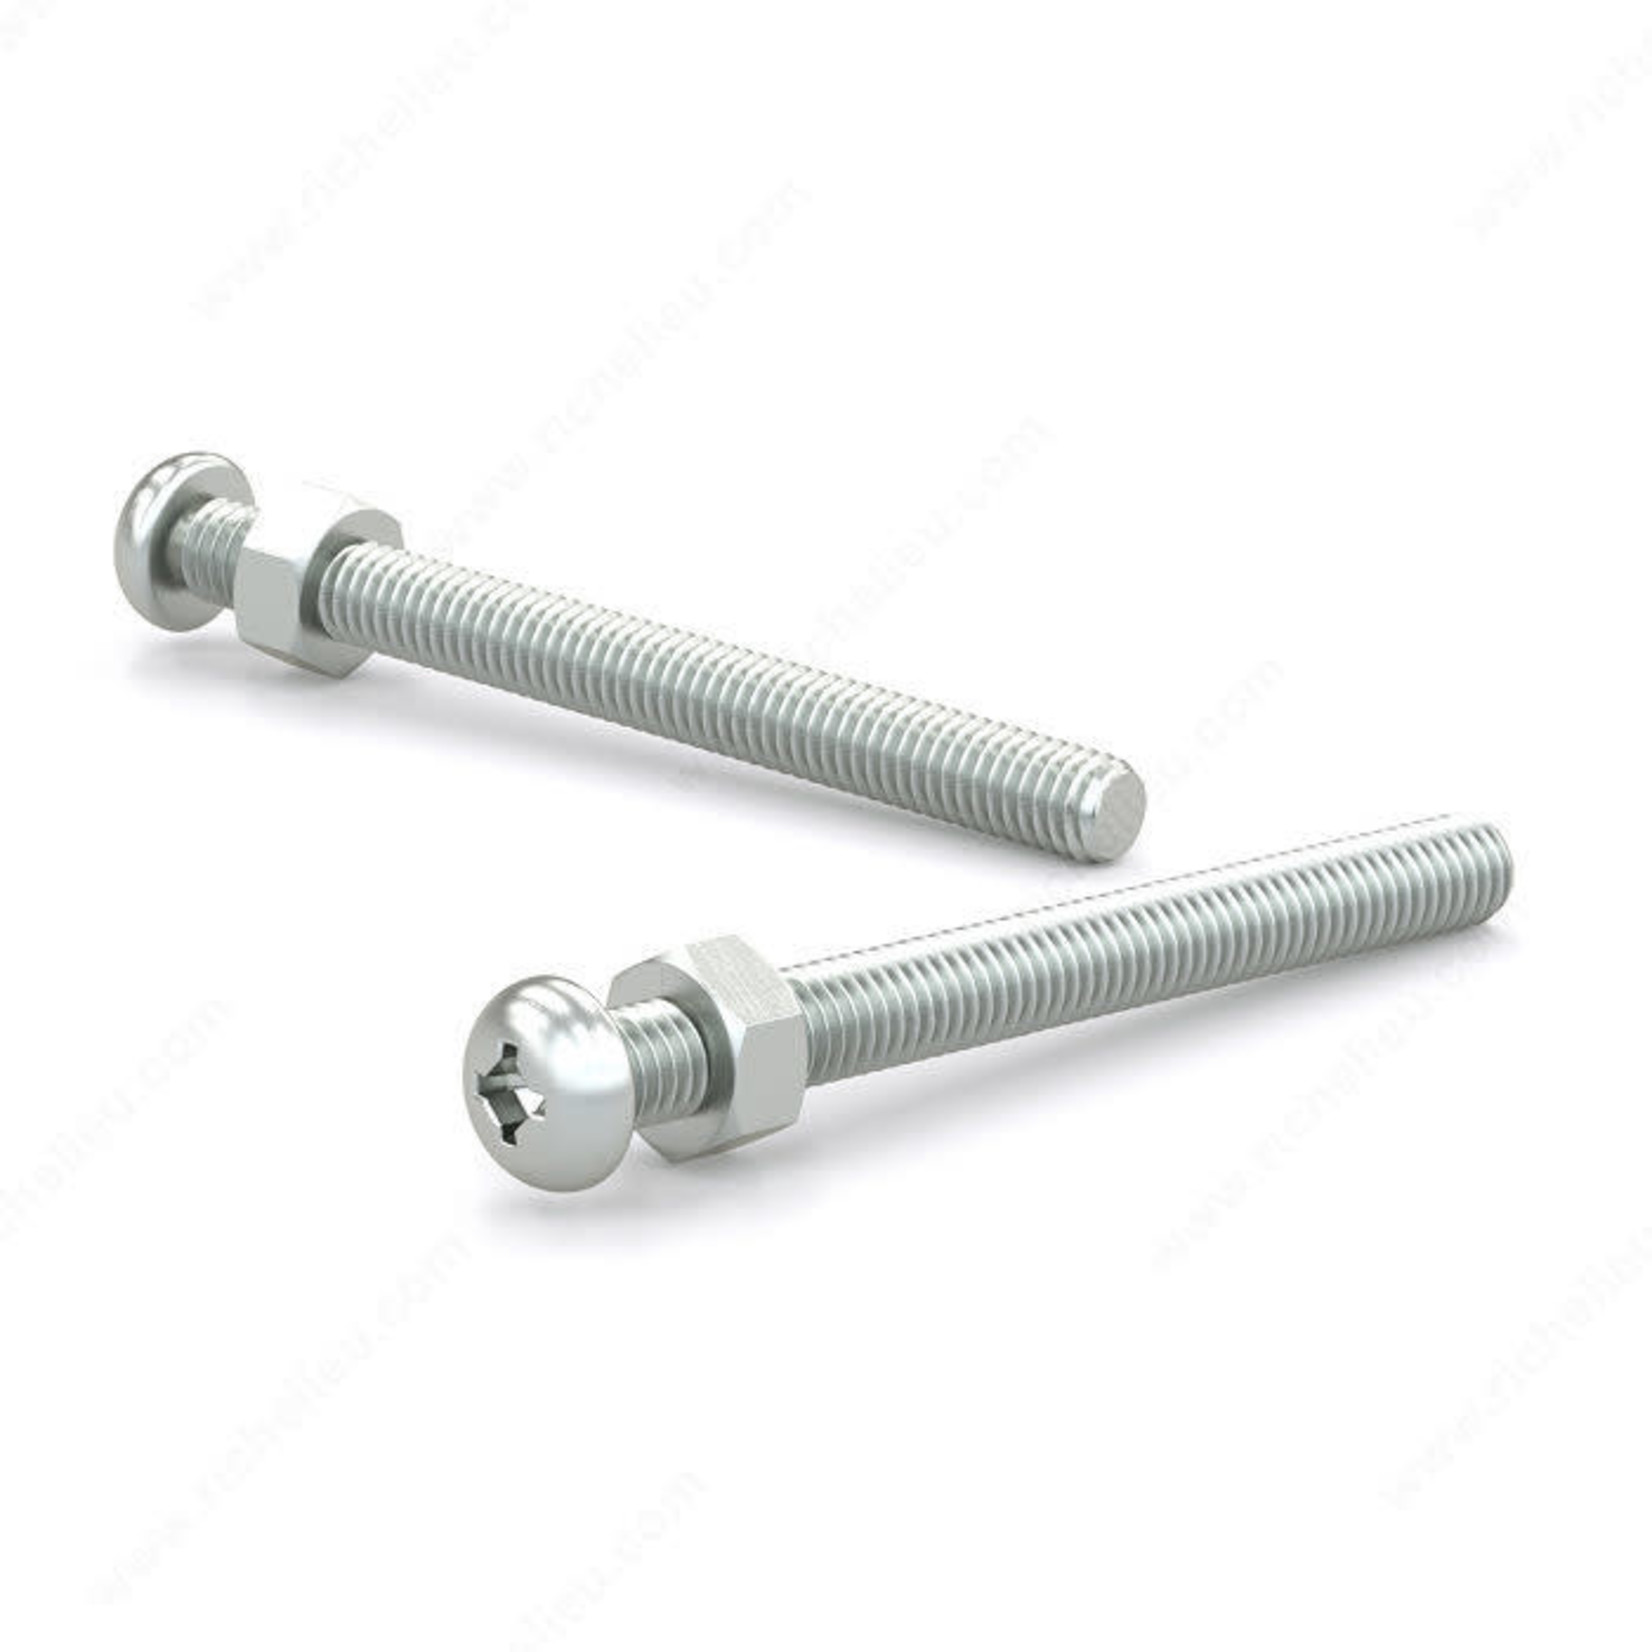 RELIABLE MACHINE SCREW WITH NUT, PAN HEAD, 1/4" 3IN, 3PK BLISTER